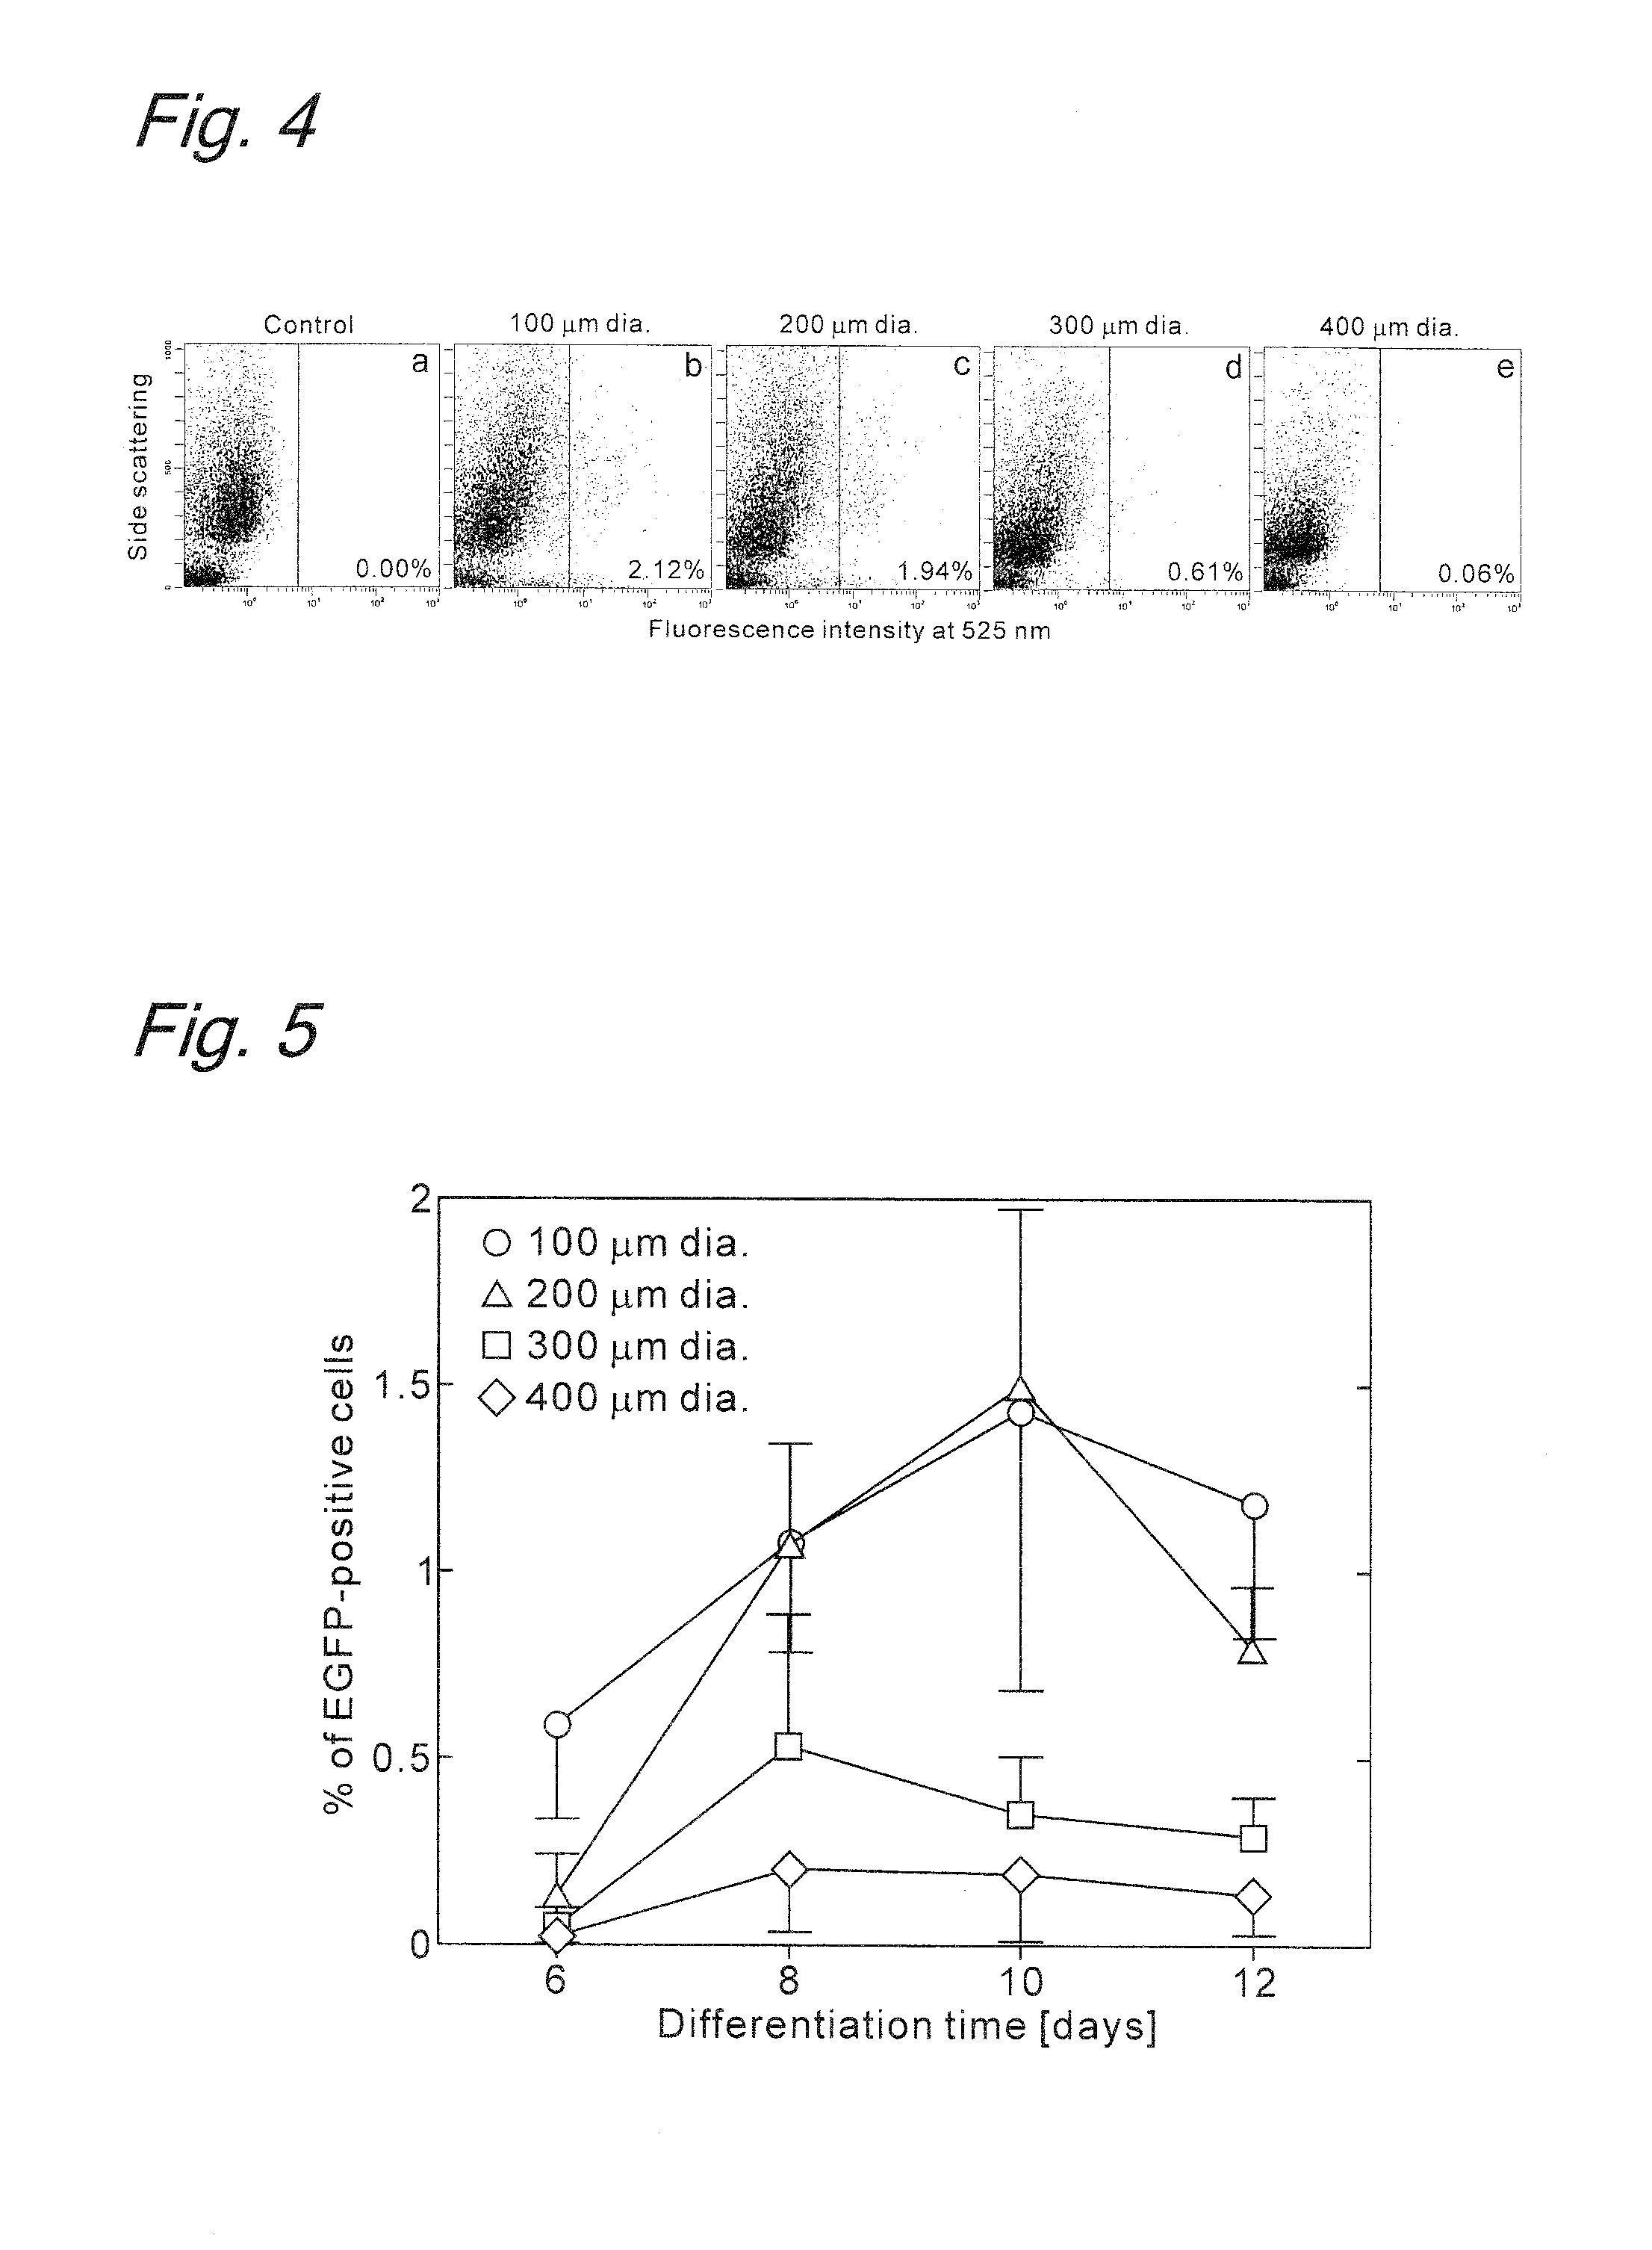 Method for inducing differentiation of embryonic stem cells or artificial pluripotent stem cells